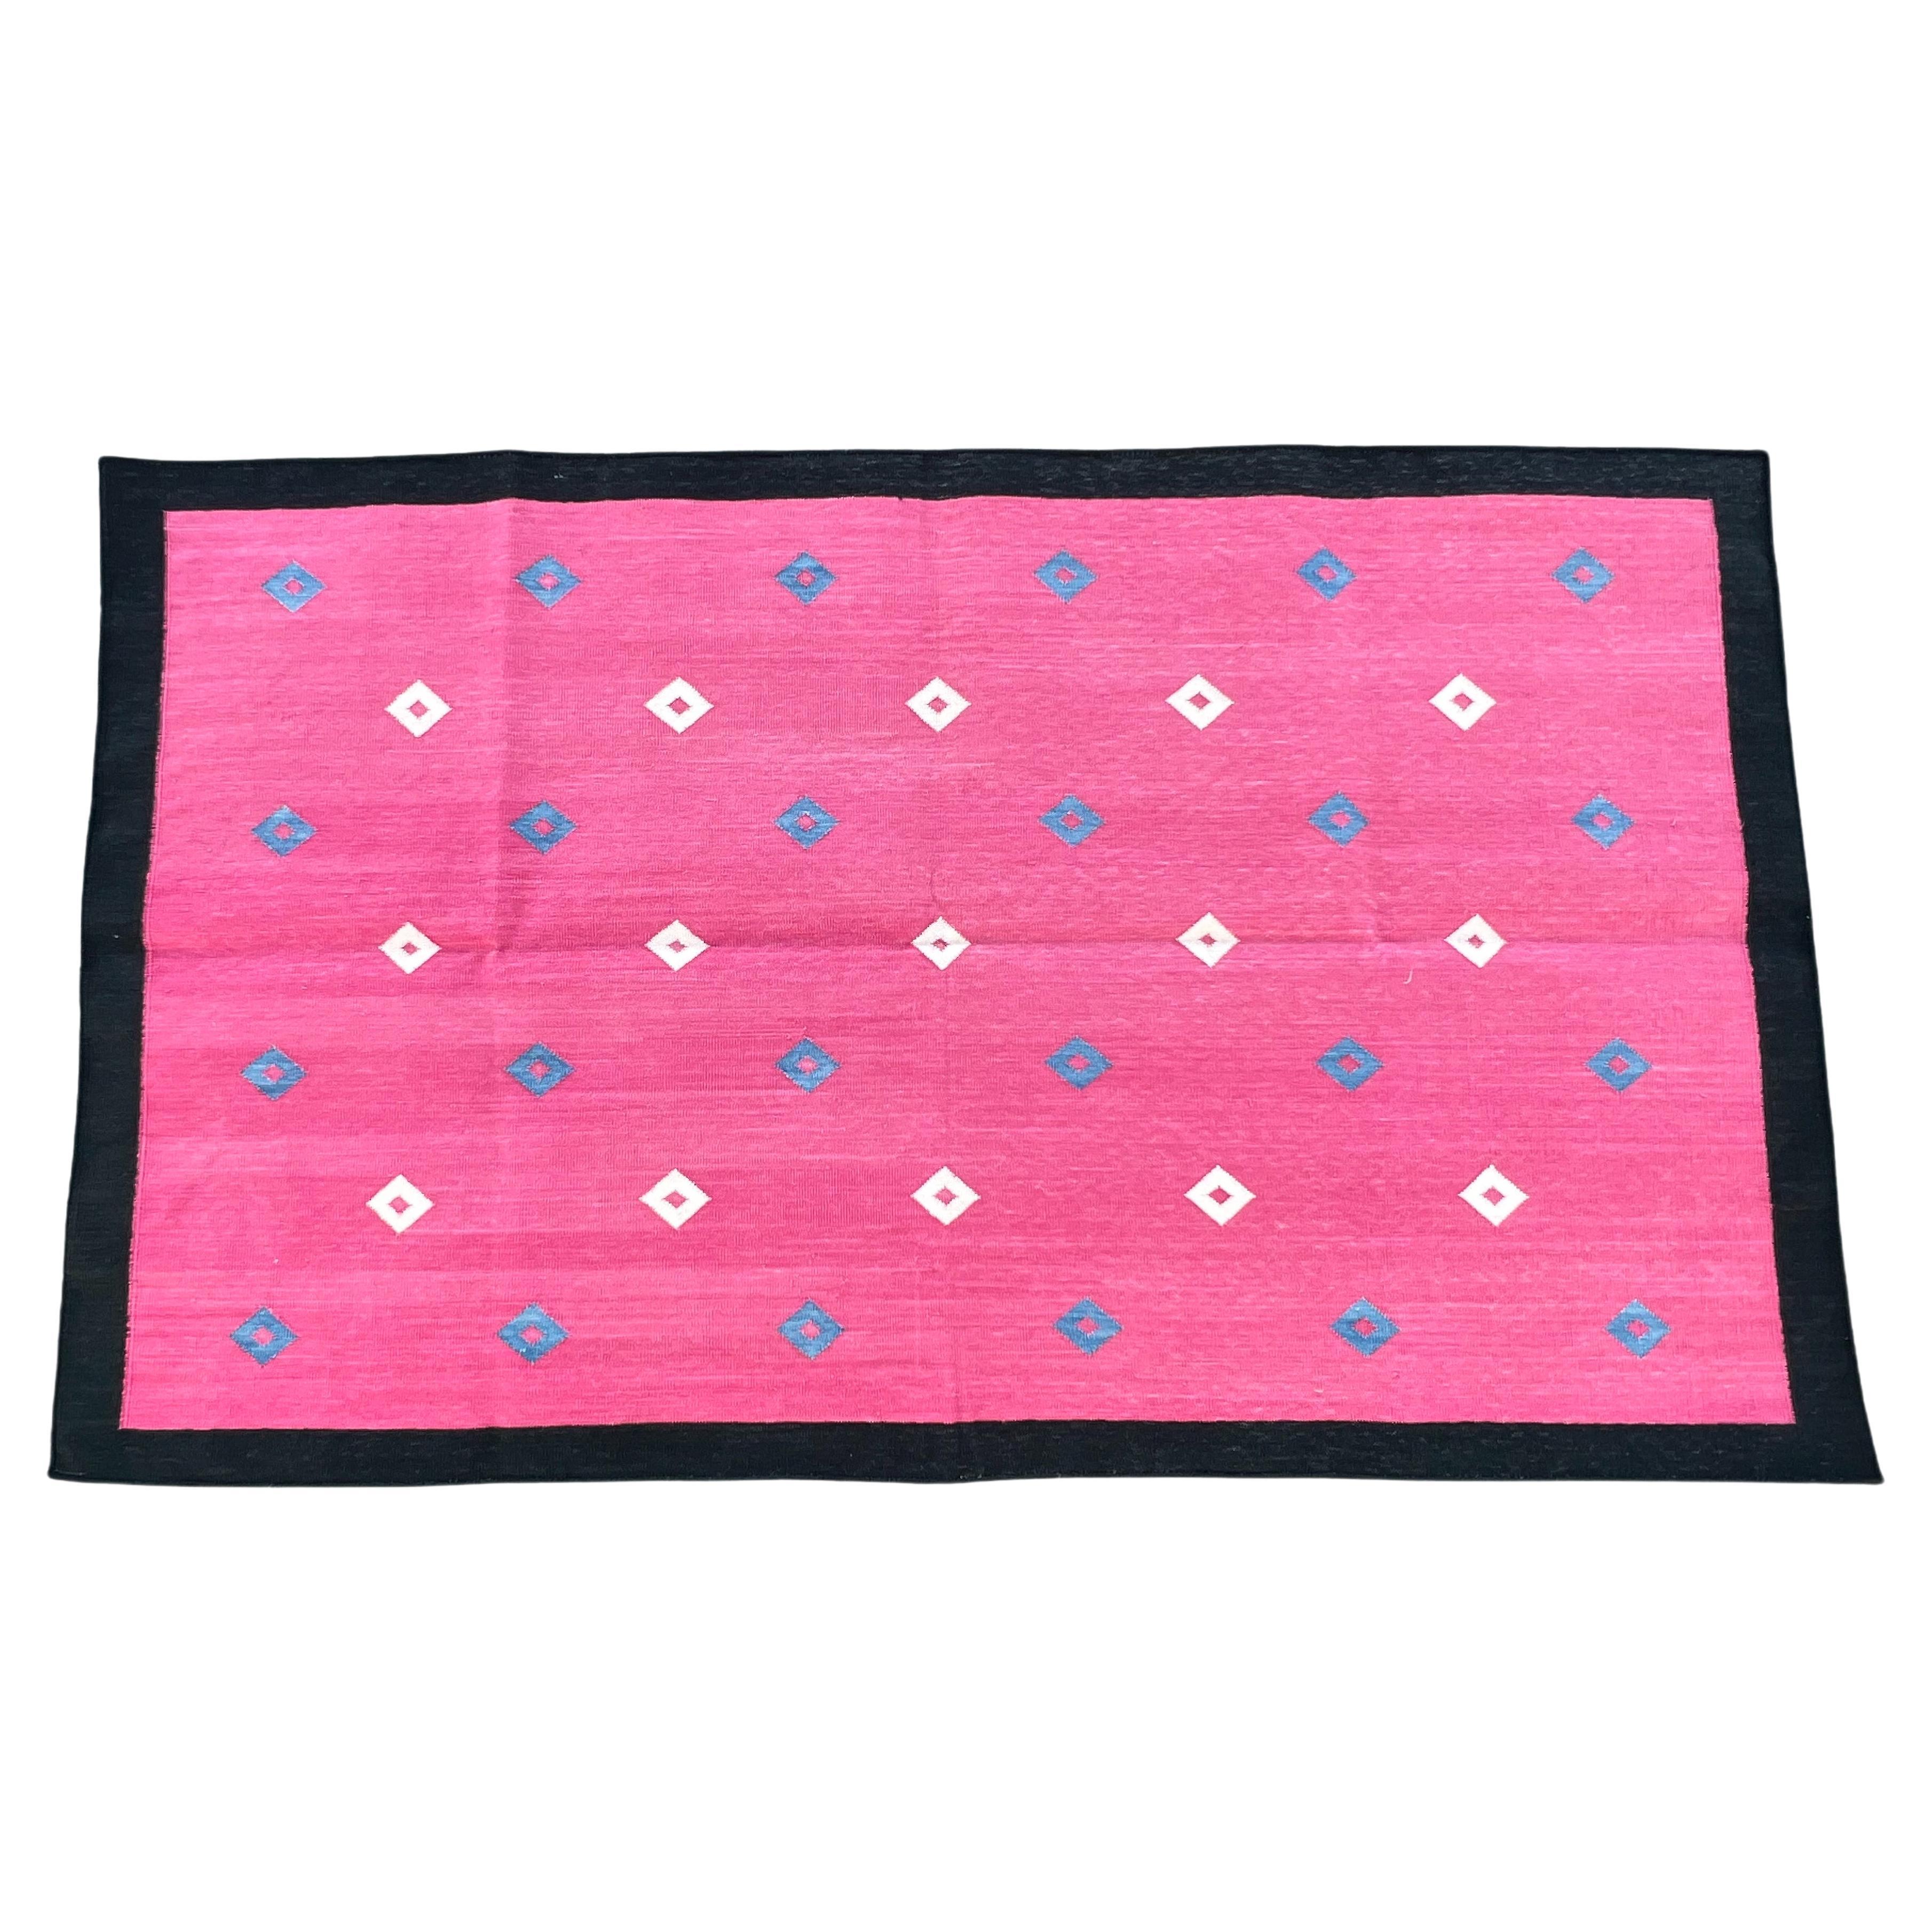 Handmade Cotton Area Flat Weave Rug, 3x5 Pink And Black Diamond Indian Dhurrie For Sale